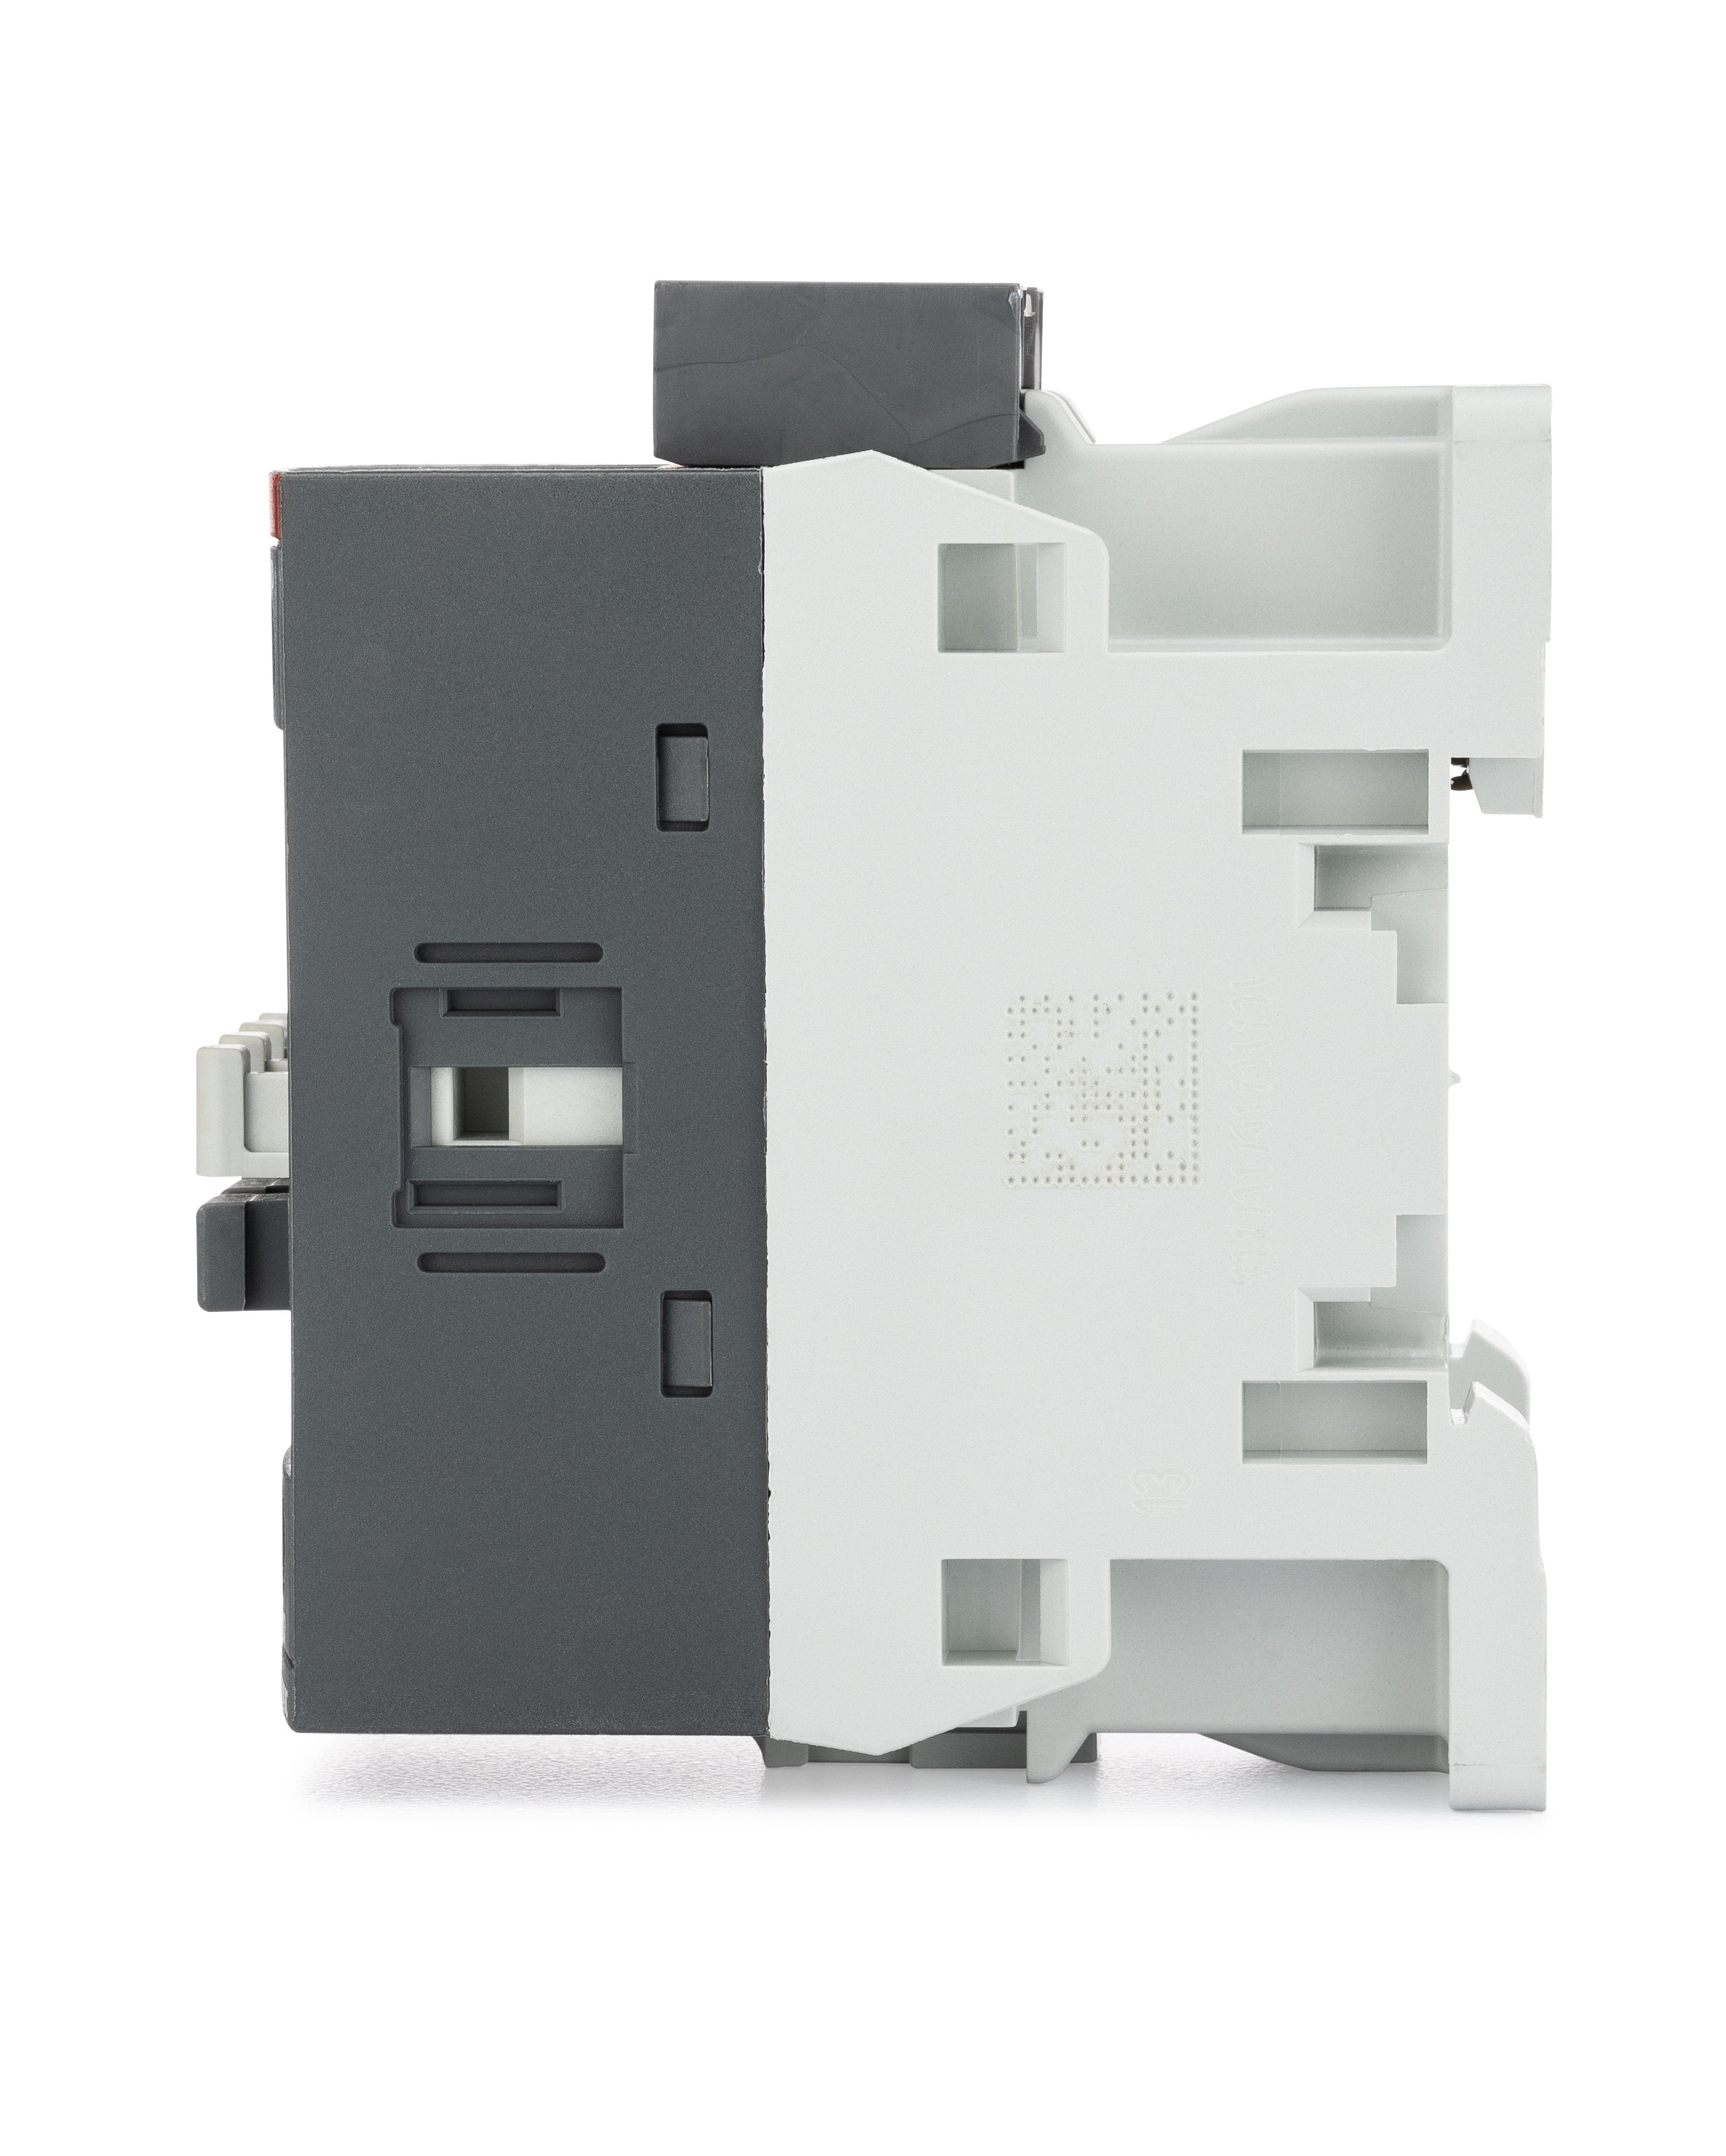 VTA 6 S / EK43 / KeGu Contactor 208V/60cy, for single and three phaseContactor AF12-30-10-13 (ABB)